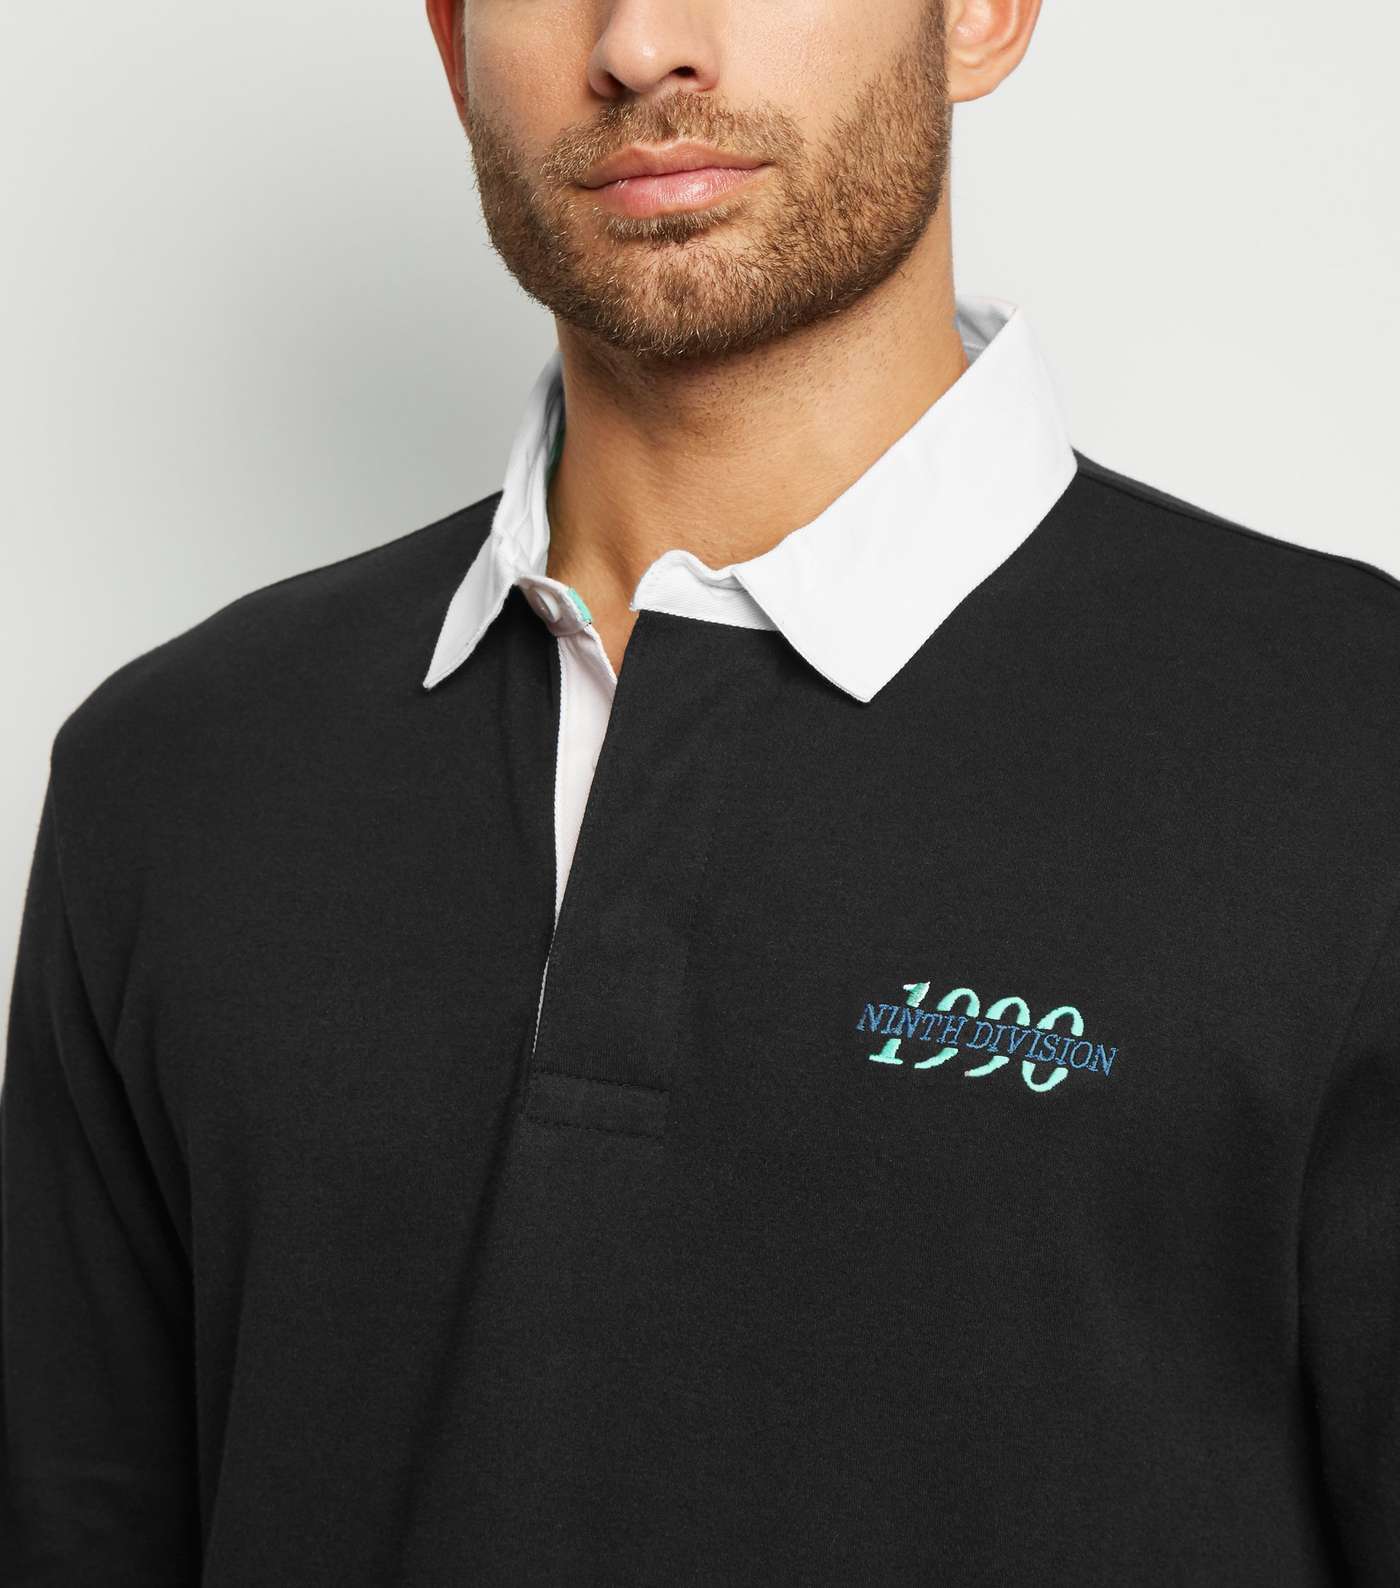 Black 1990 Embroidered Slogan Rugby Shirt Image 5